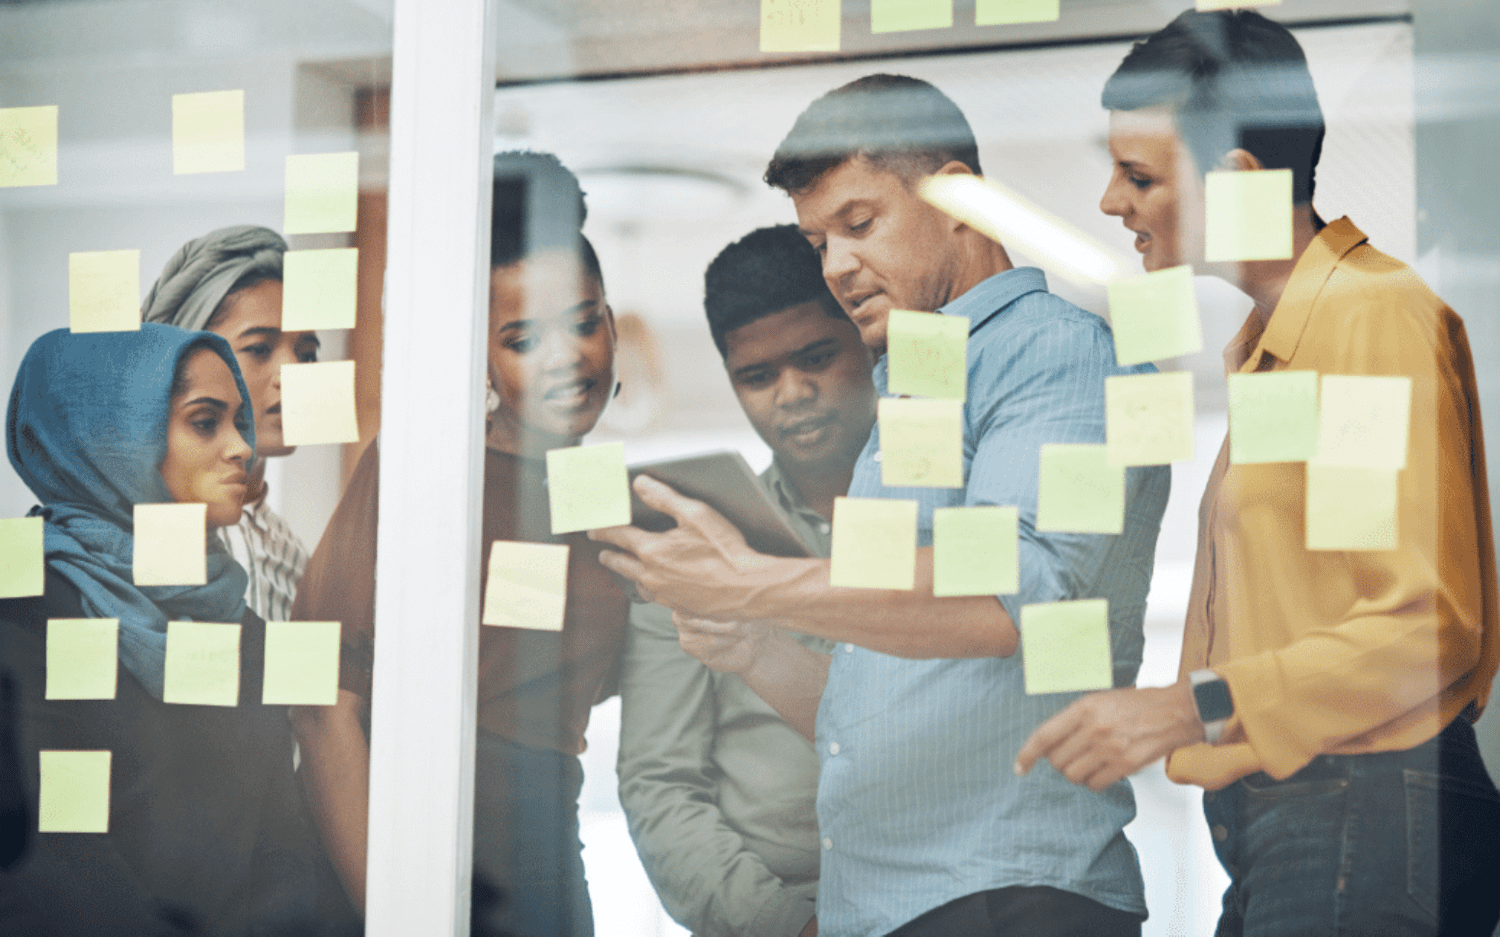 Drive innovation through engaged employees